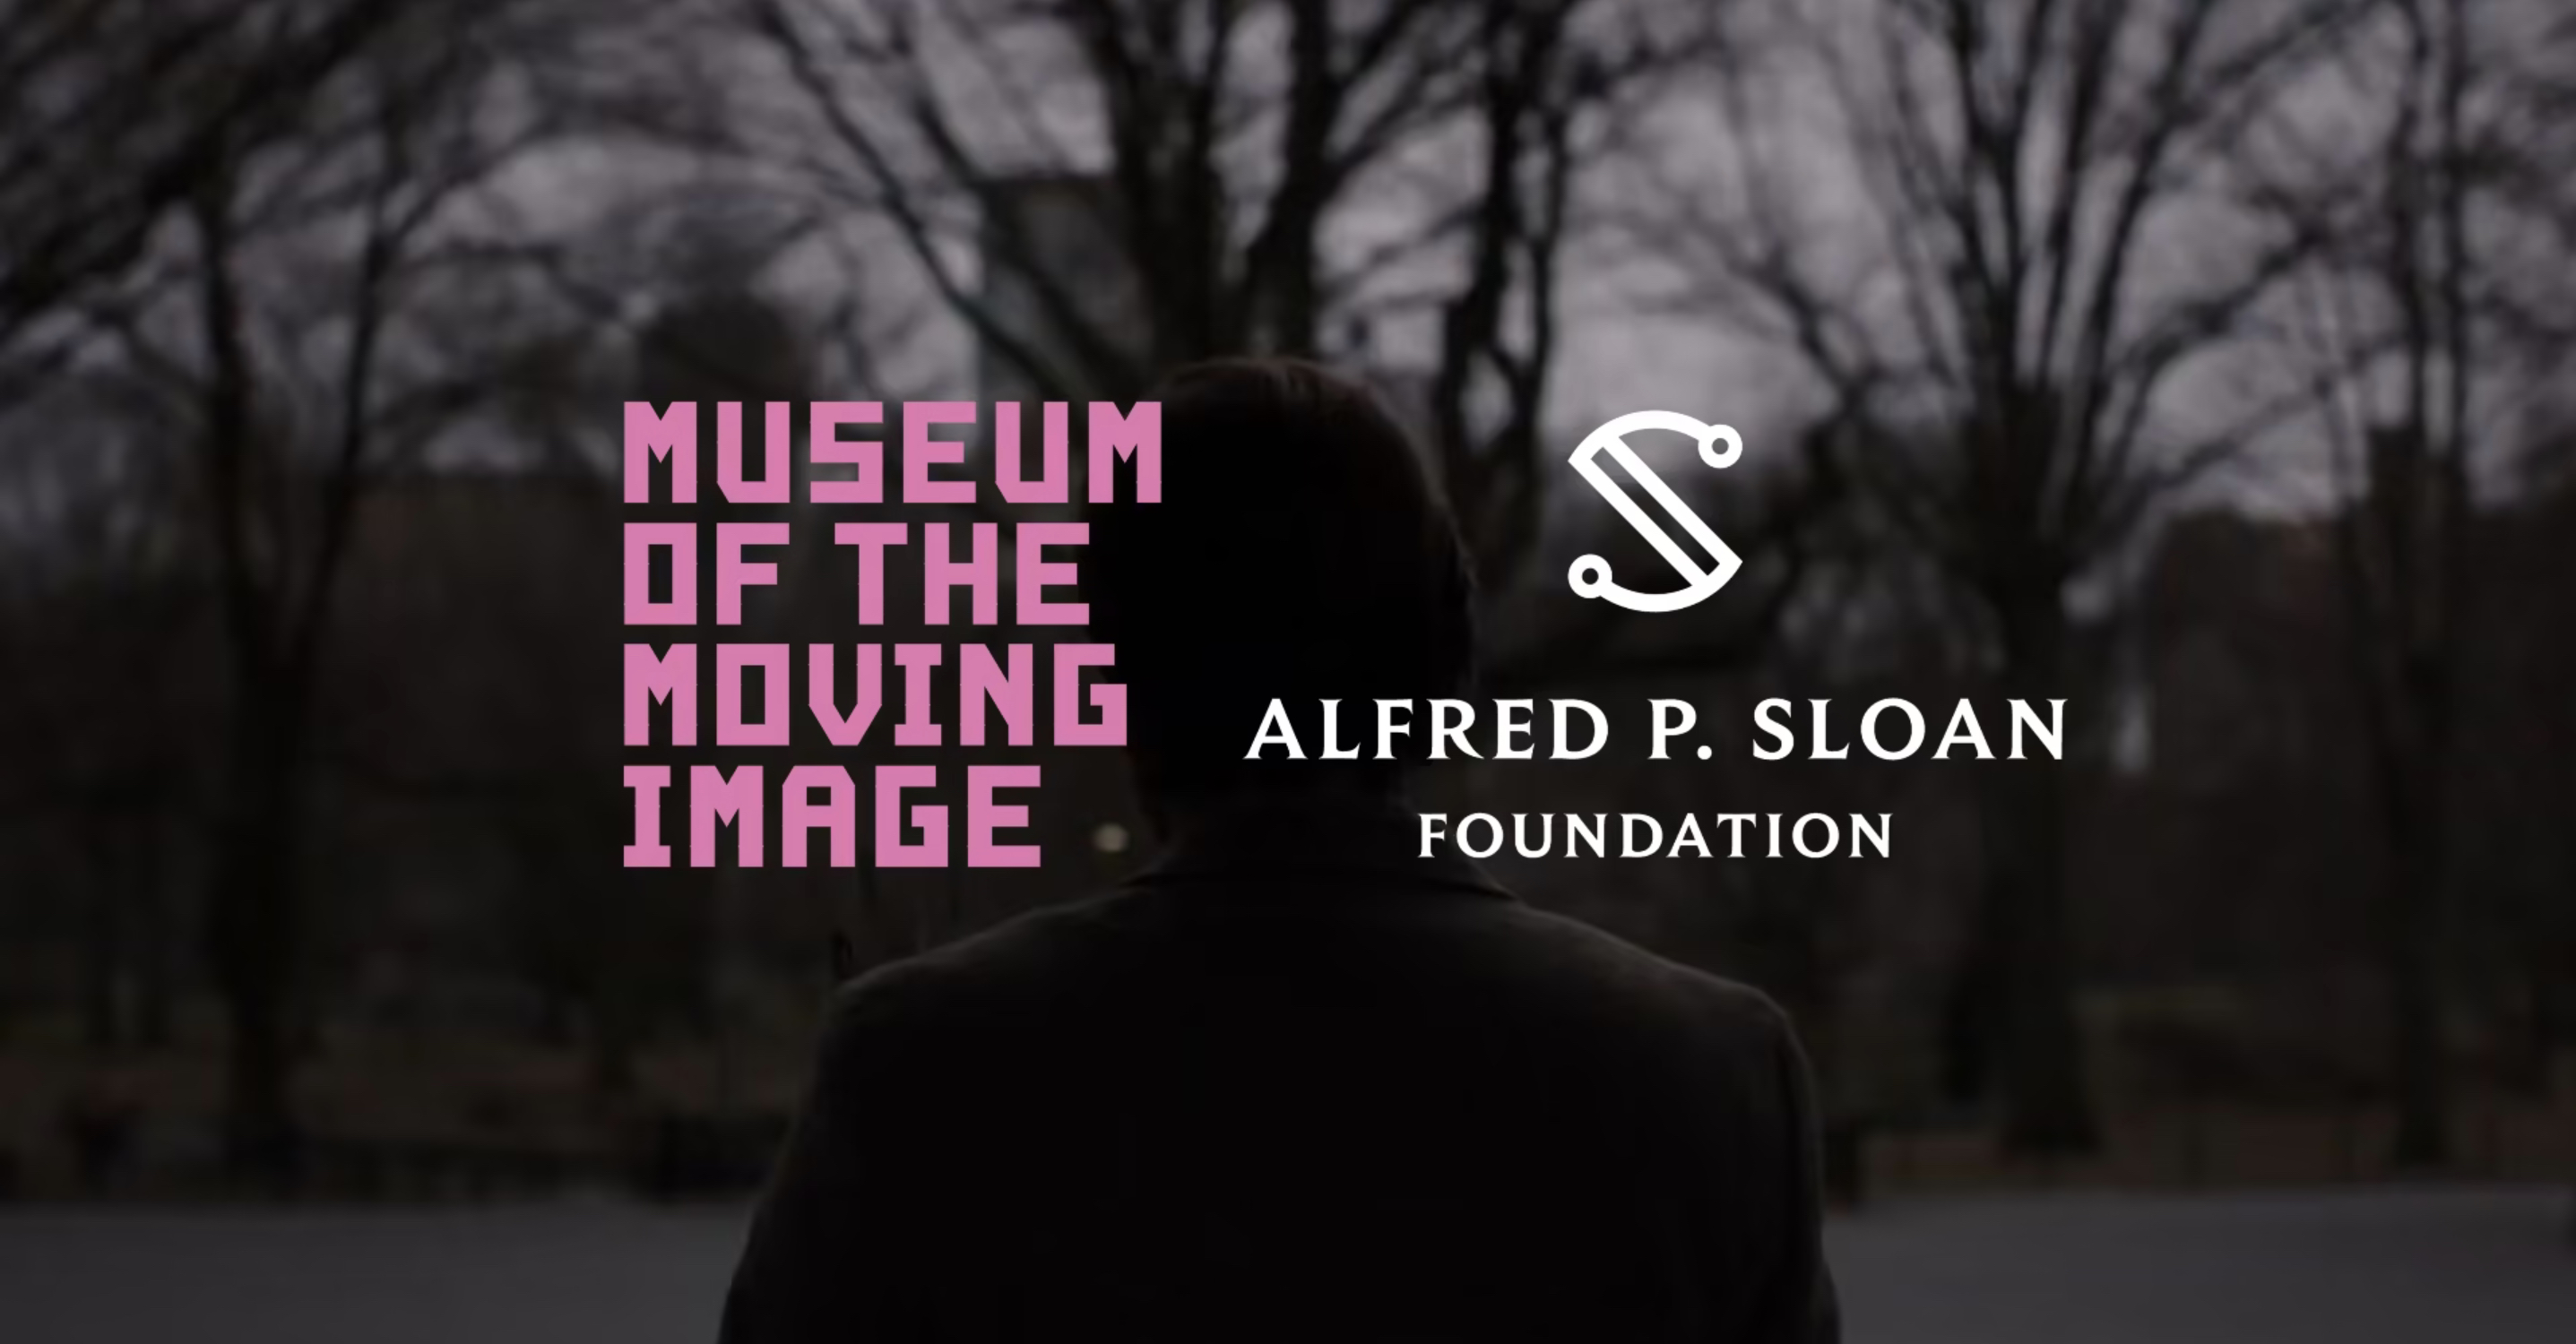 A person standing in the woods with a pink logo of Museum of the Moving Image and a logo for Alfred P. Sloan Foundation superimposed